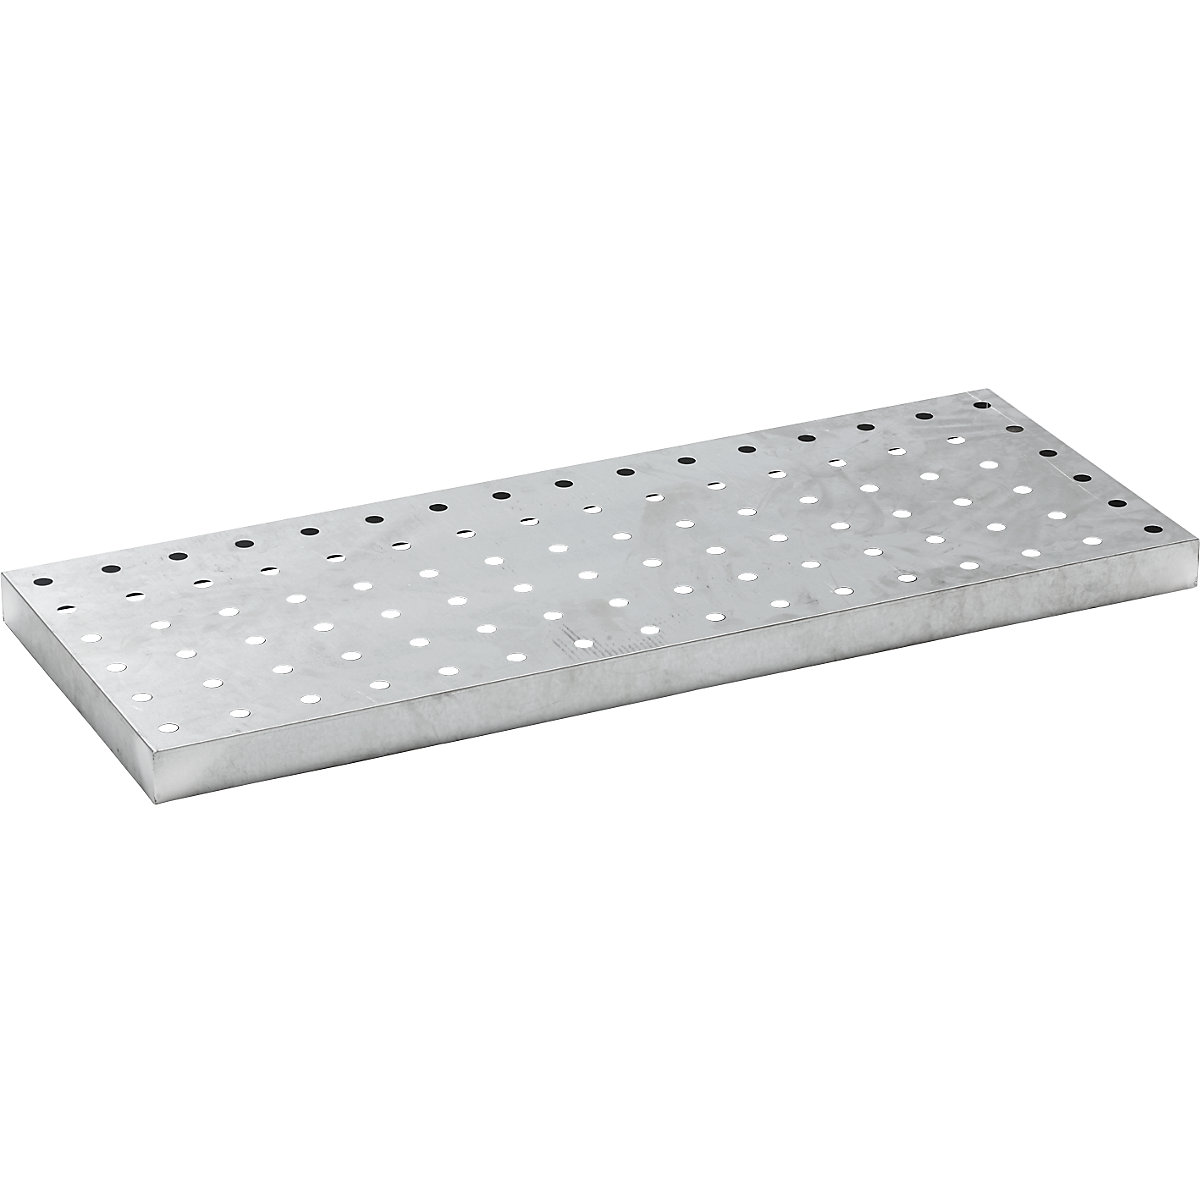 Perforated sheet metal grate – eurokraft basic, zinc plated, for universal tray, for 30 l sump capacity-3